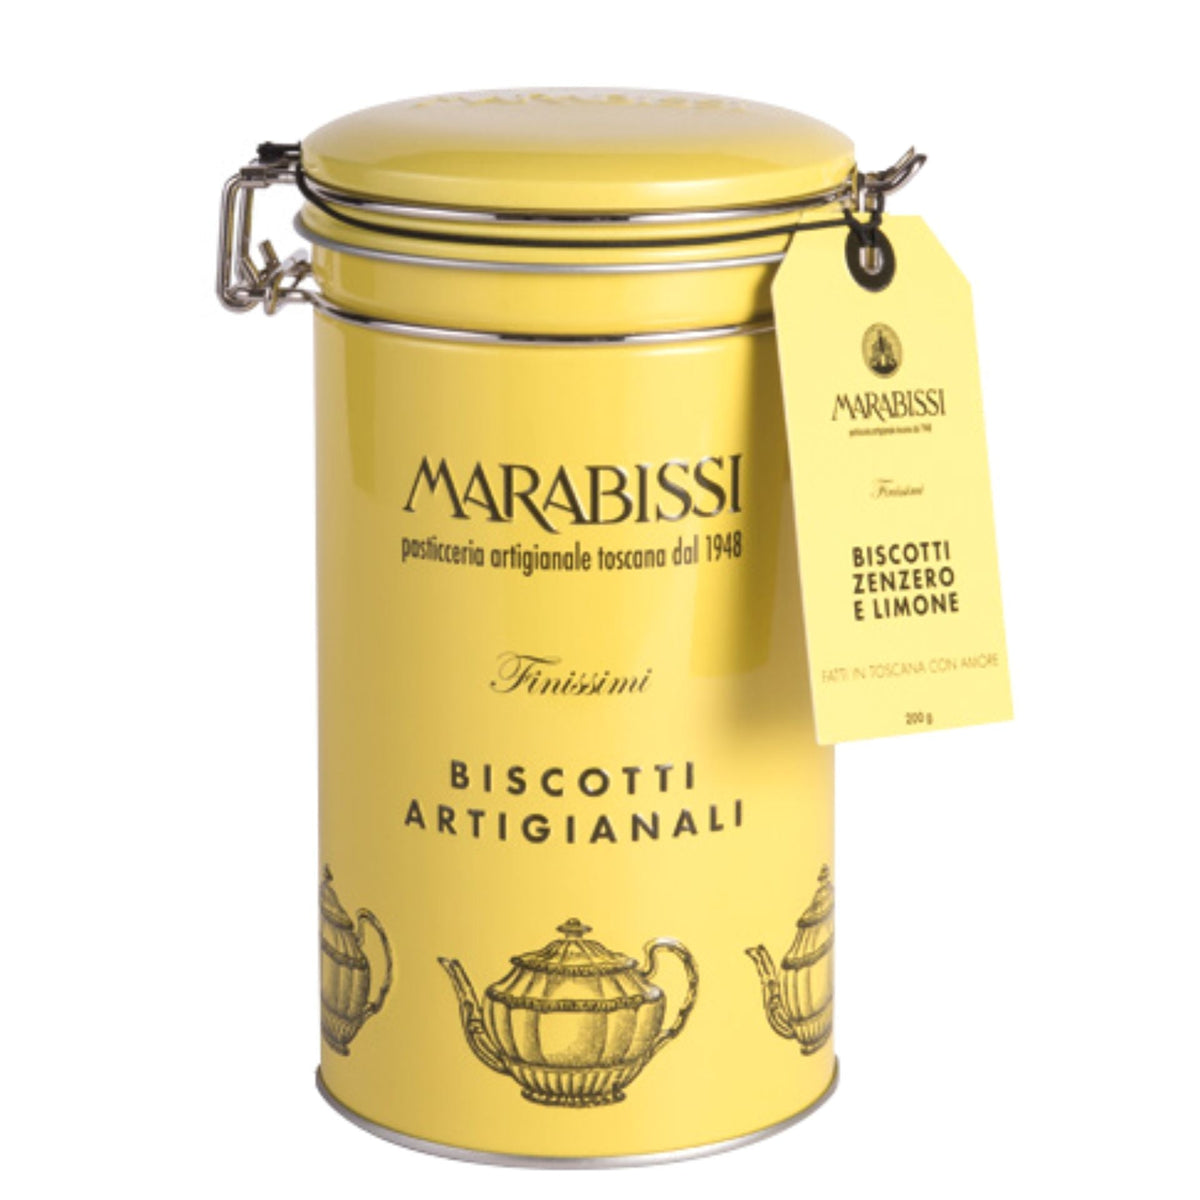 Marabissi Lemon &amp; Ginger Artisan Biscuits (Tin) 200g  | Imported and distributed in the UK by Just Gourmet Foods